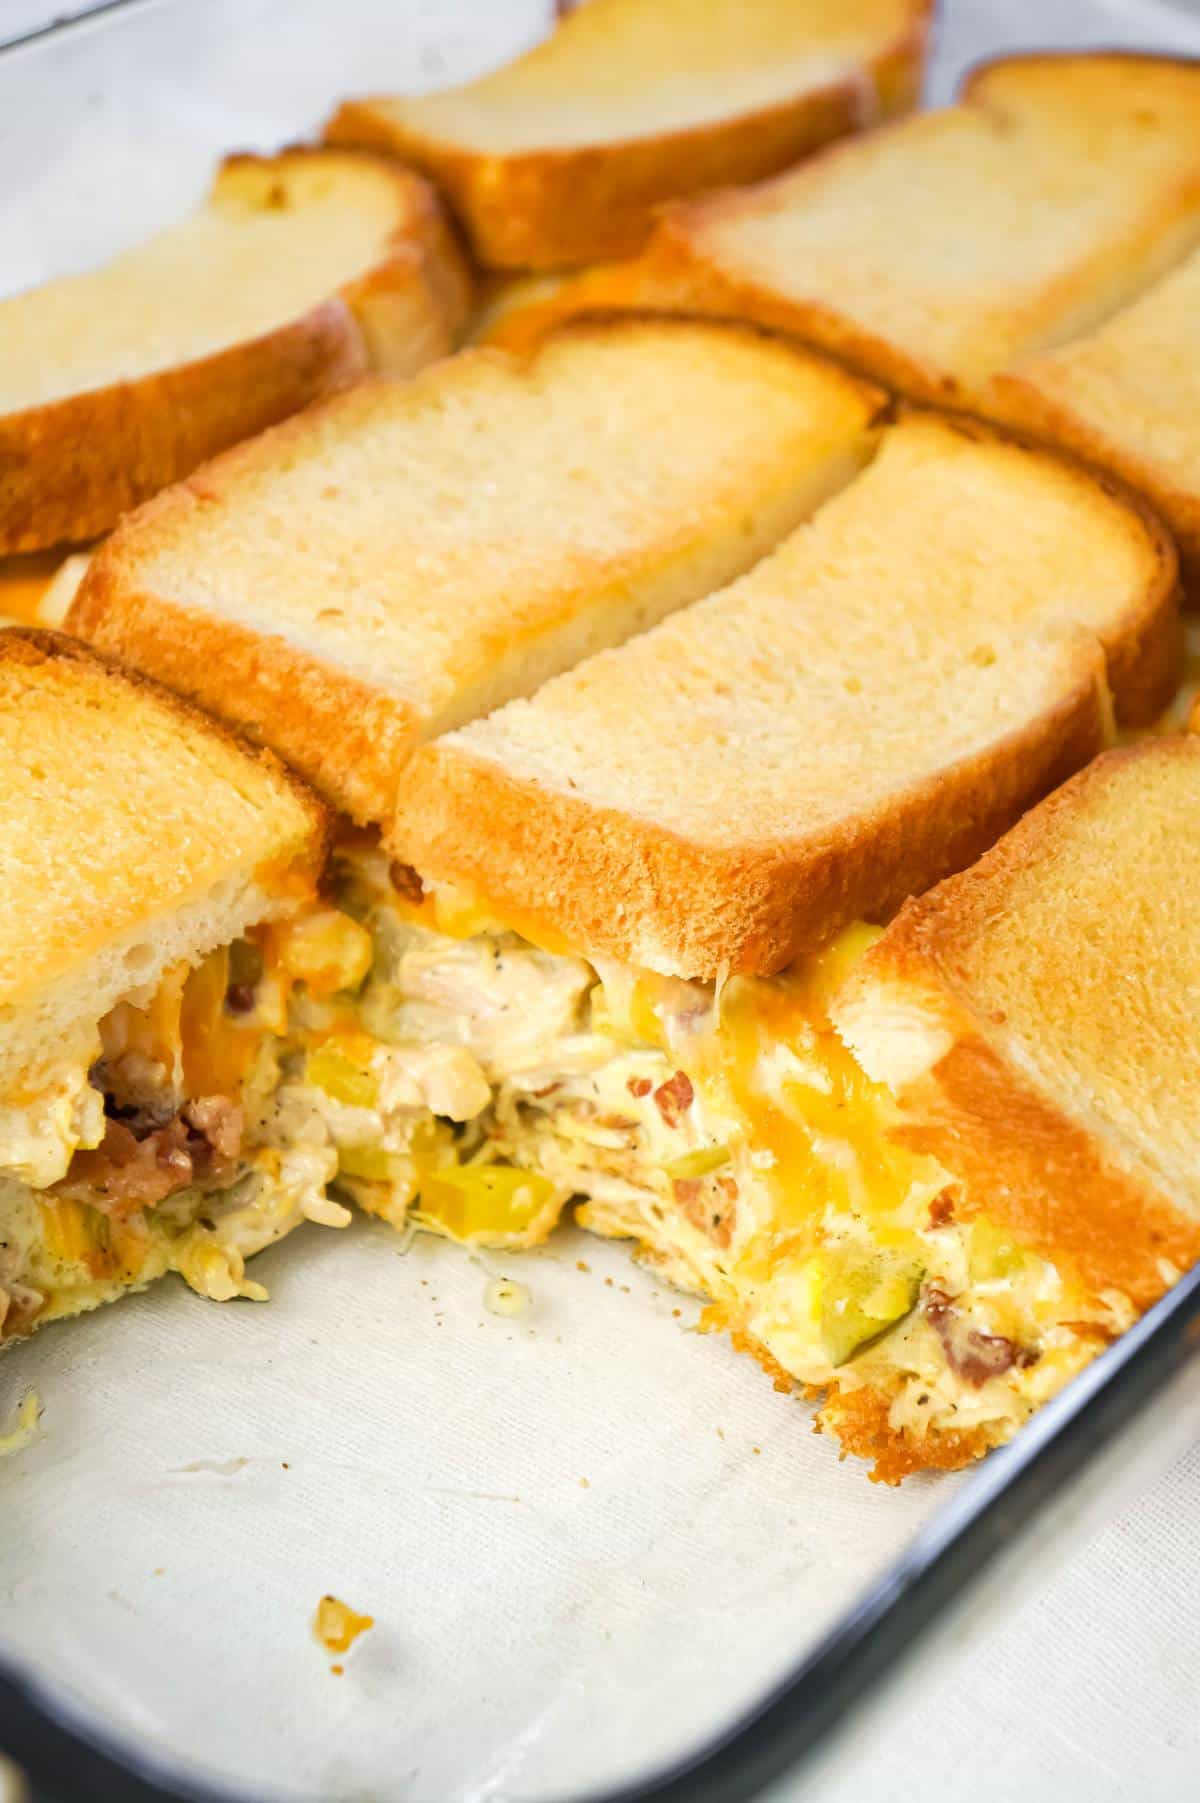 Dill Pickle Chicken Grilled Cheese Casserole is a delicious dinner recipe loaded with shredded chicken, diced dill pickles, crumbled bacon, ranch dressing and cheese all in between layers of toasted bread.